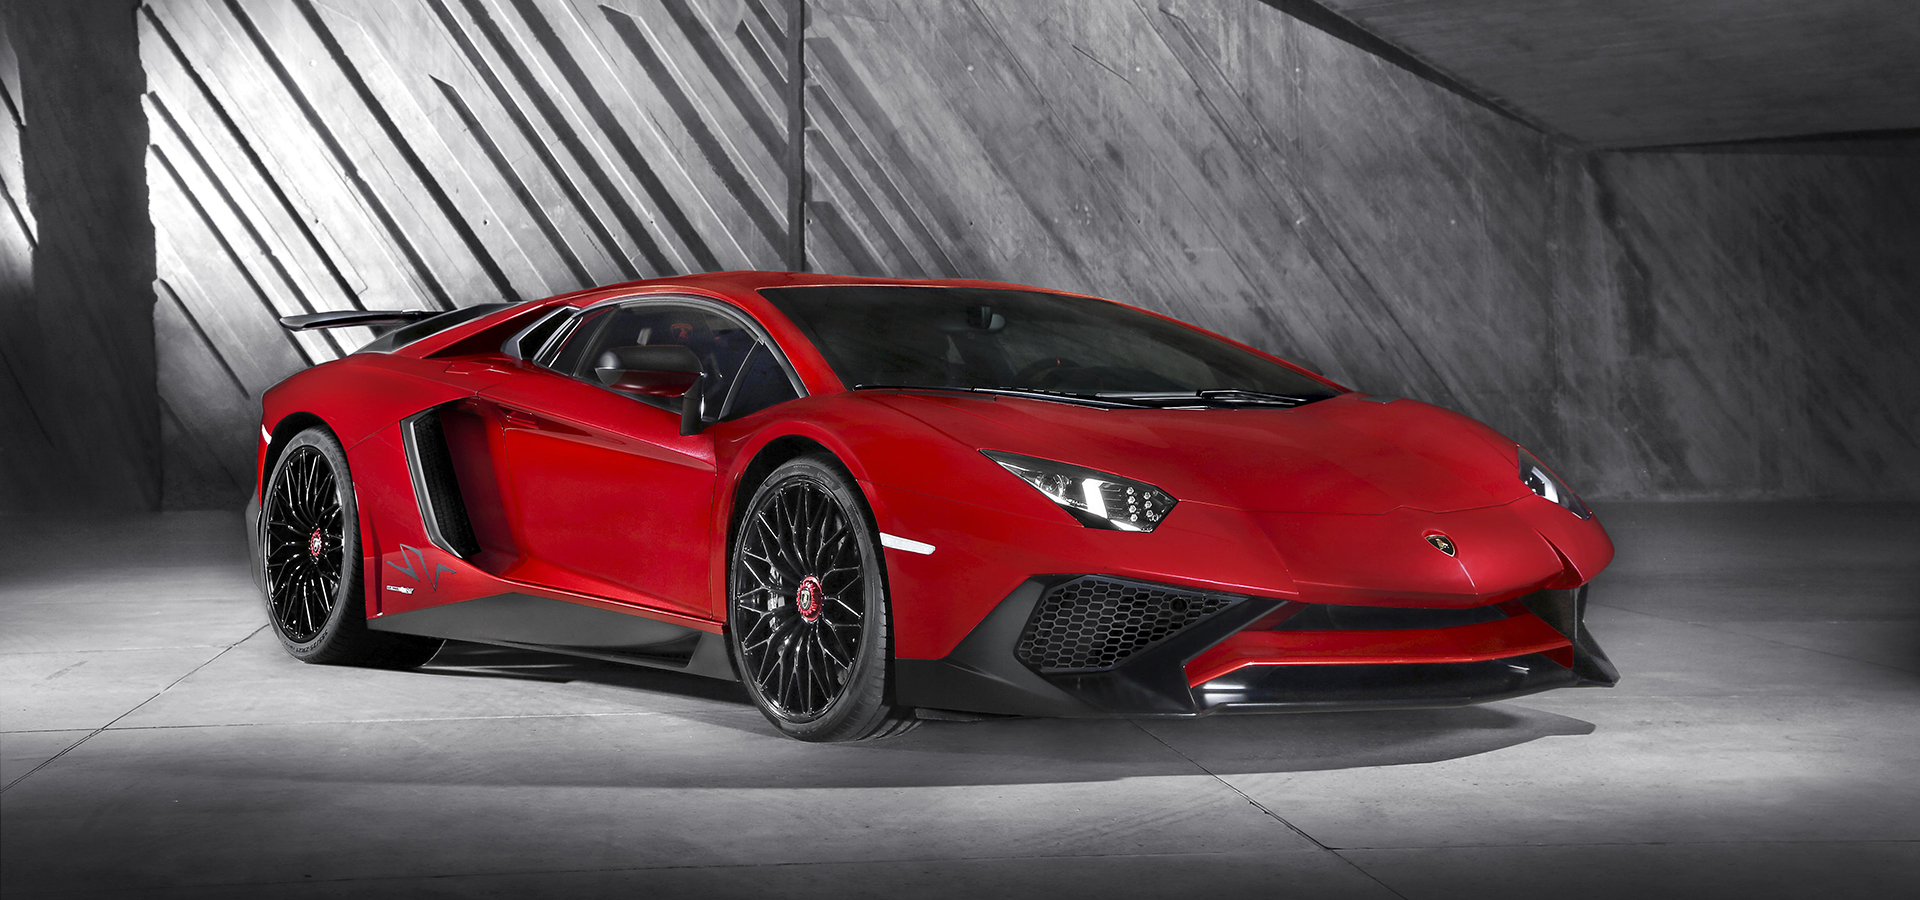 10 years of Lamborghini Aventador, and the innovations that made it